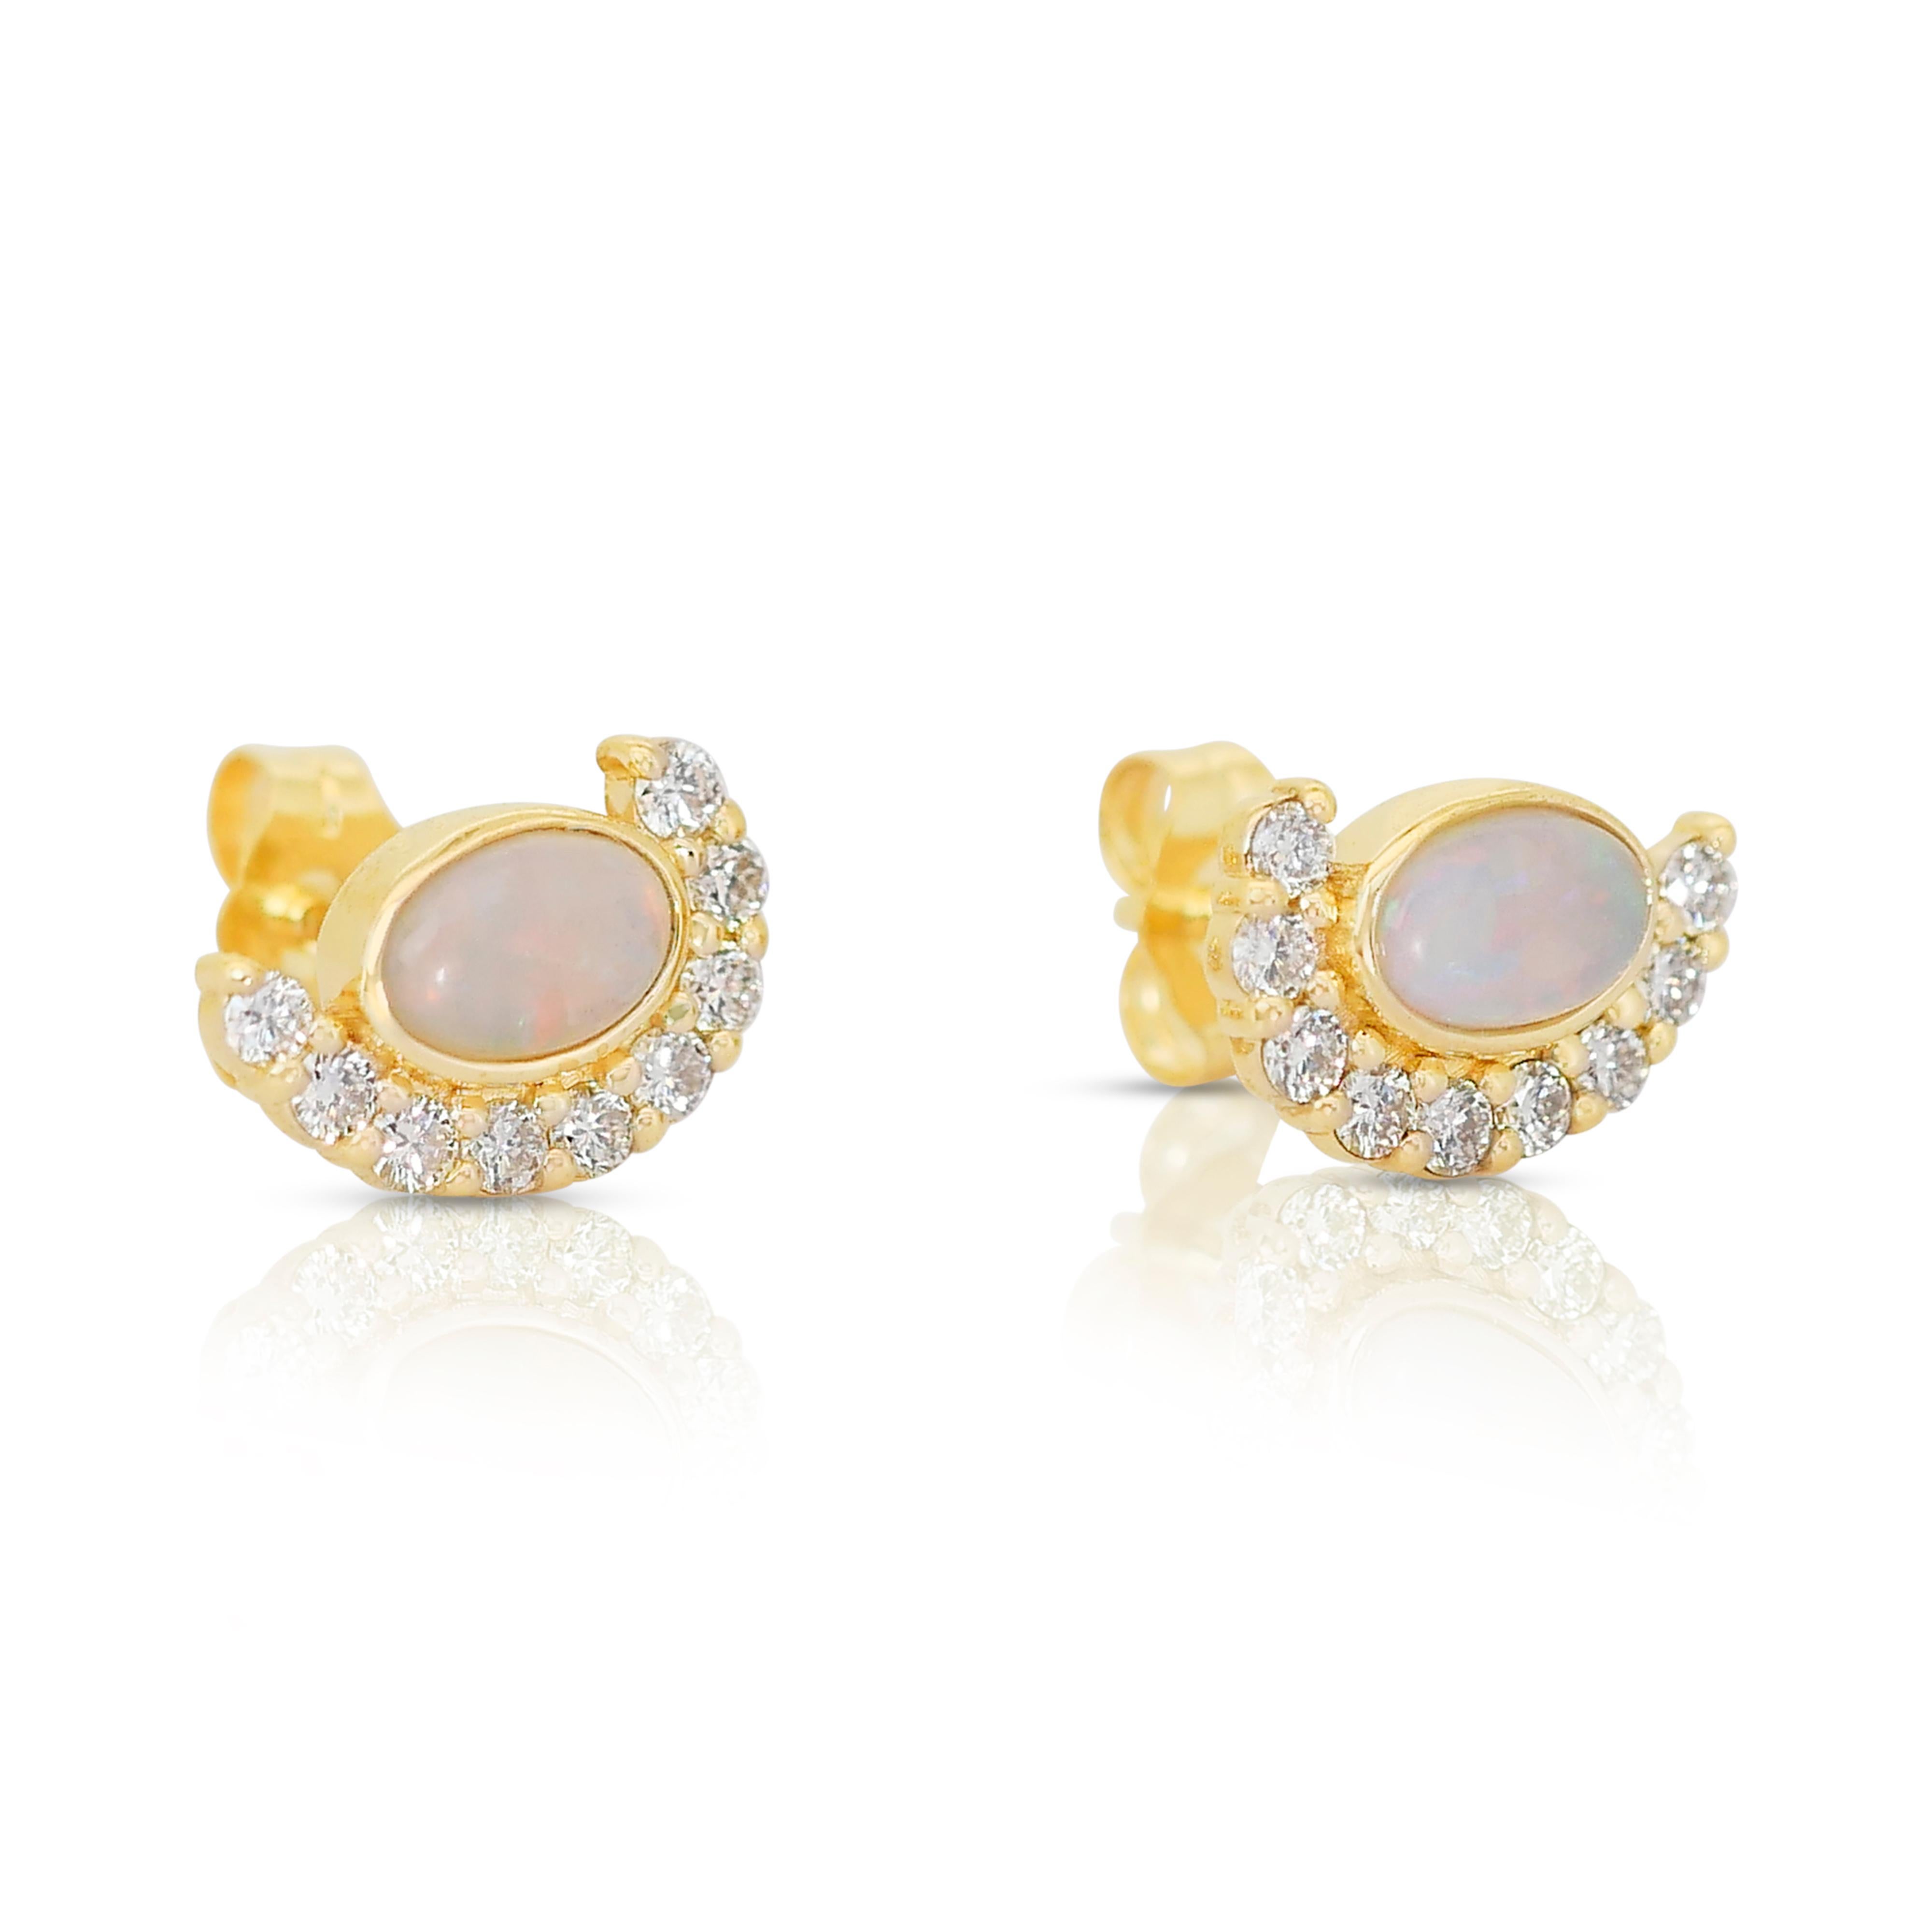  Lovely 14k Yellow Gold Opal and Diamond Halo Stud Earrings w/1.15 ct - IGI Cert In New Condition For Sale In רמת גן, IL